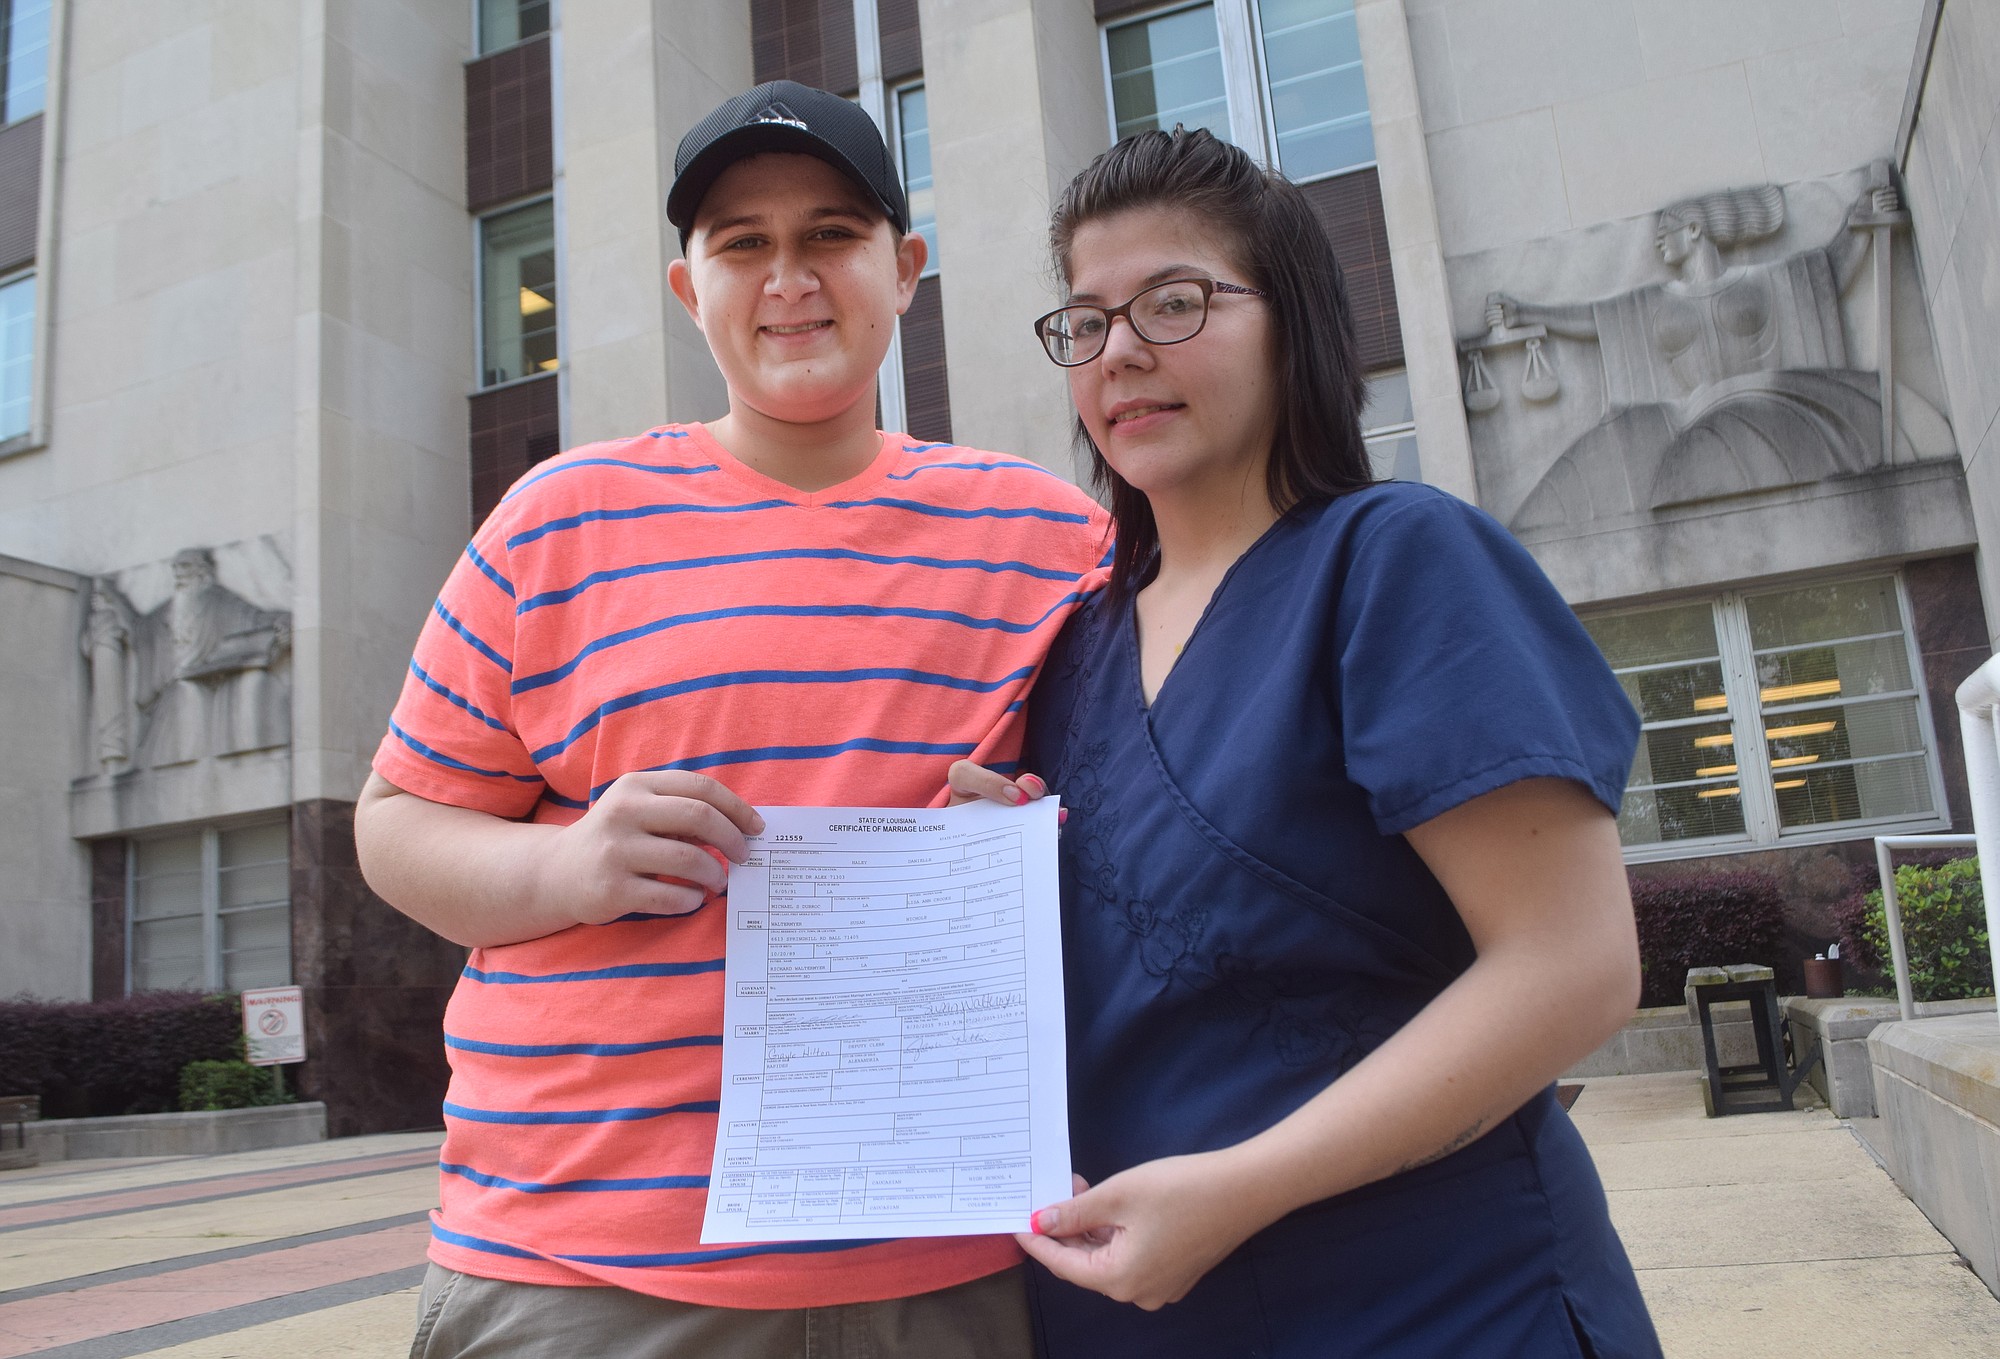 Haley Dubroc, left, and Susan Waltermyer hold their marriage license outside the Rapides Parish Courthouse in Alexandria, La., on Tuesday.